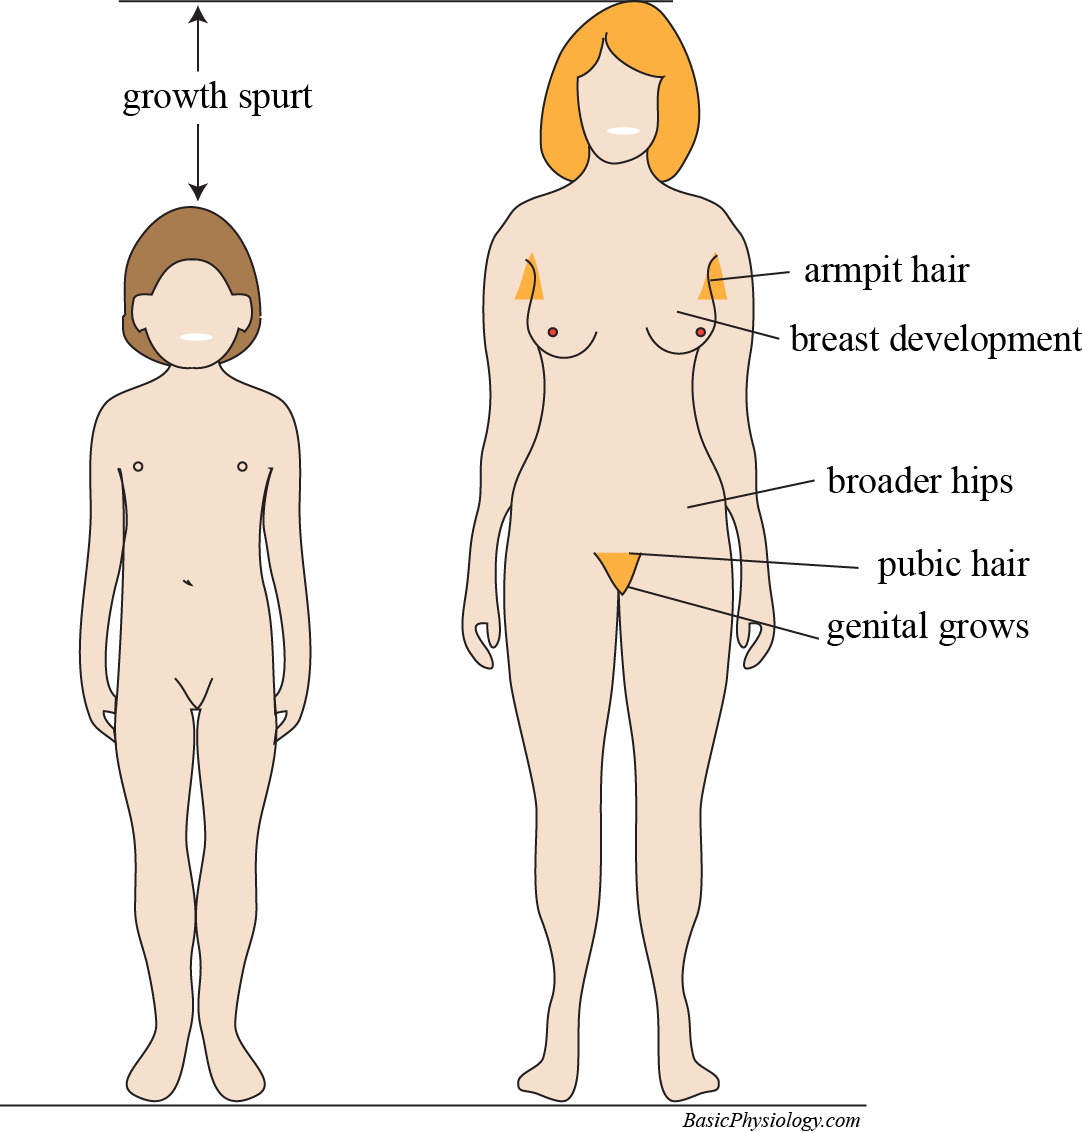 Signs of Female Puberty